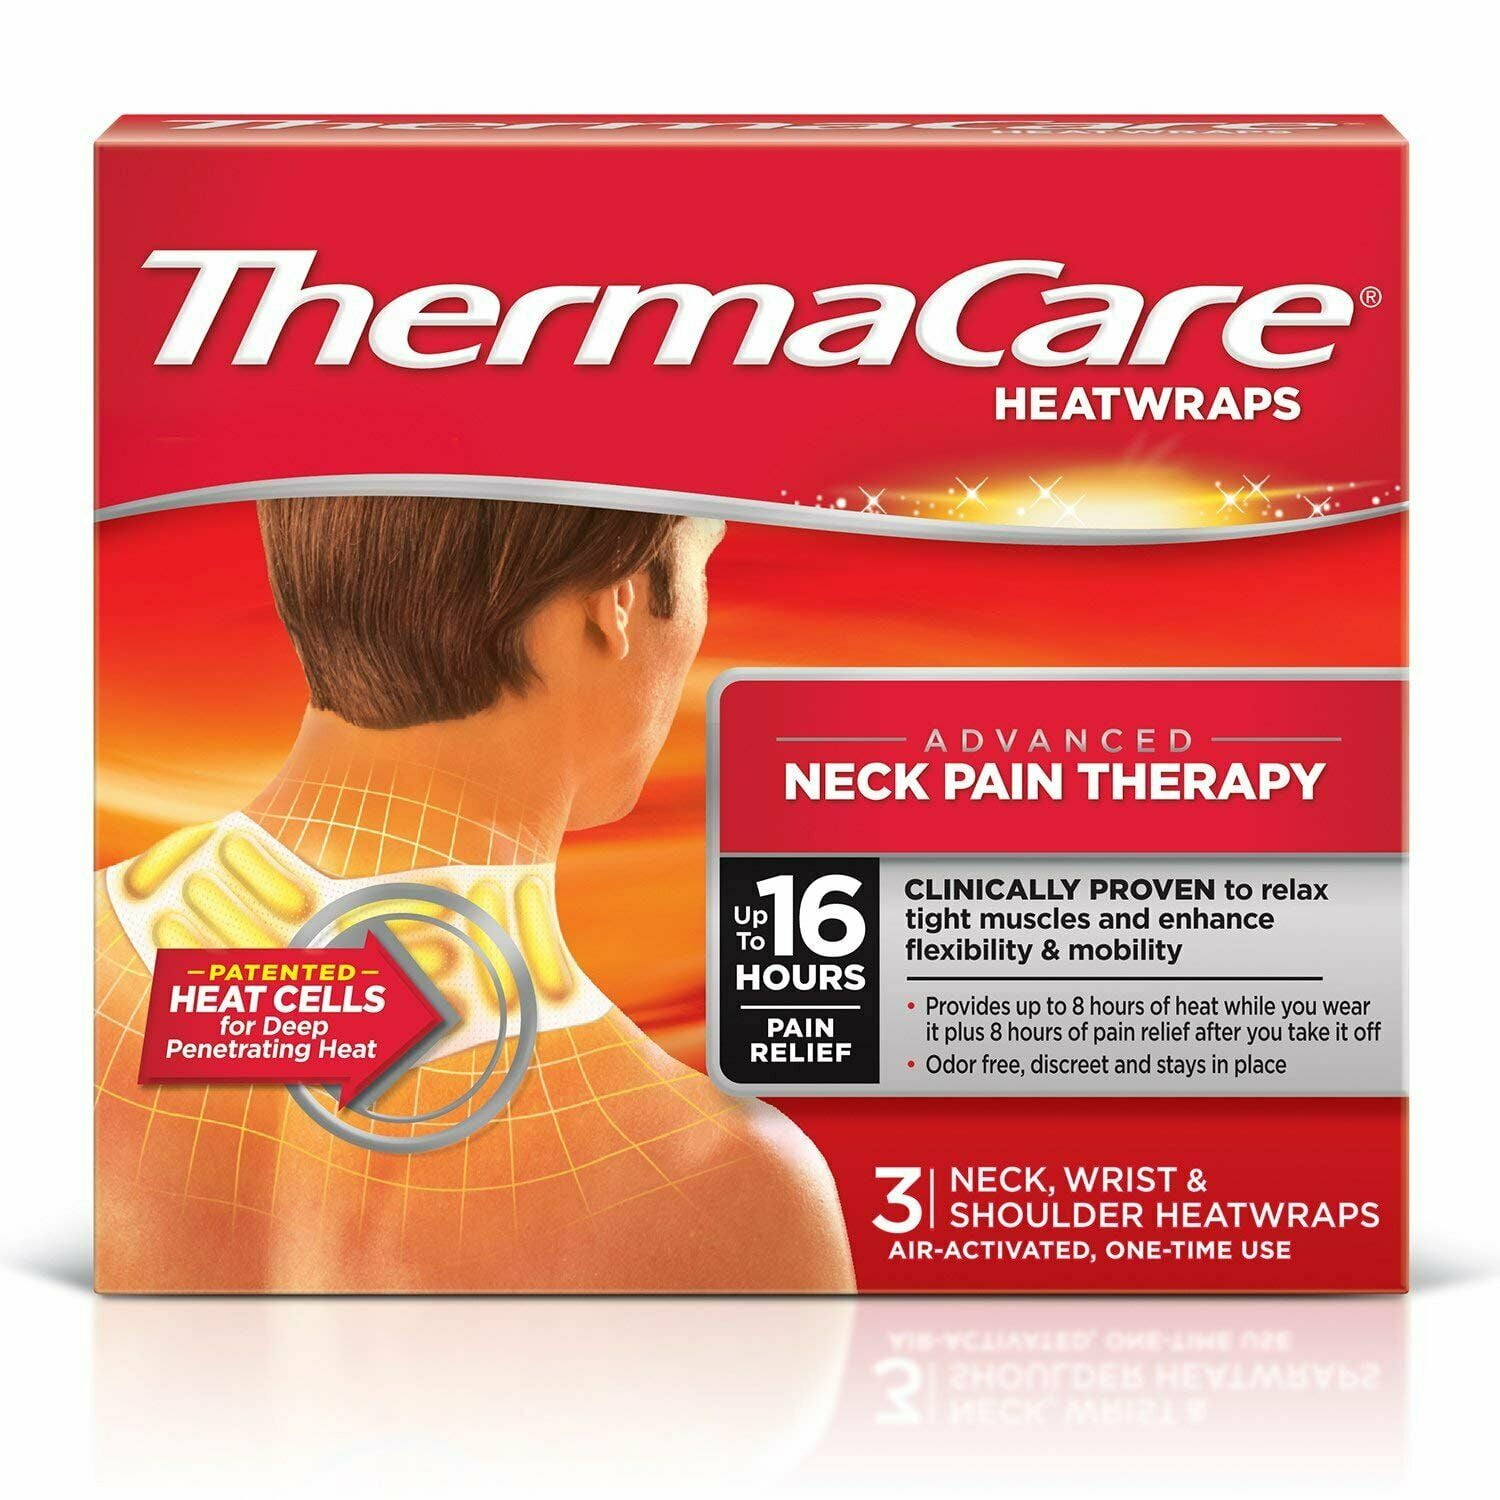 Thermacare Heatwraps Advanced Air-Activated Neck Pain Therapy